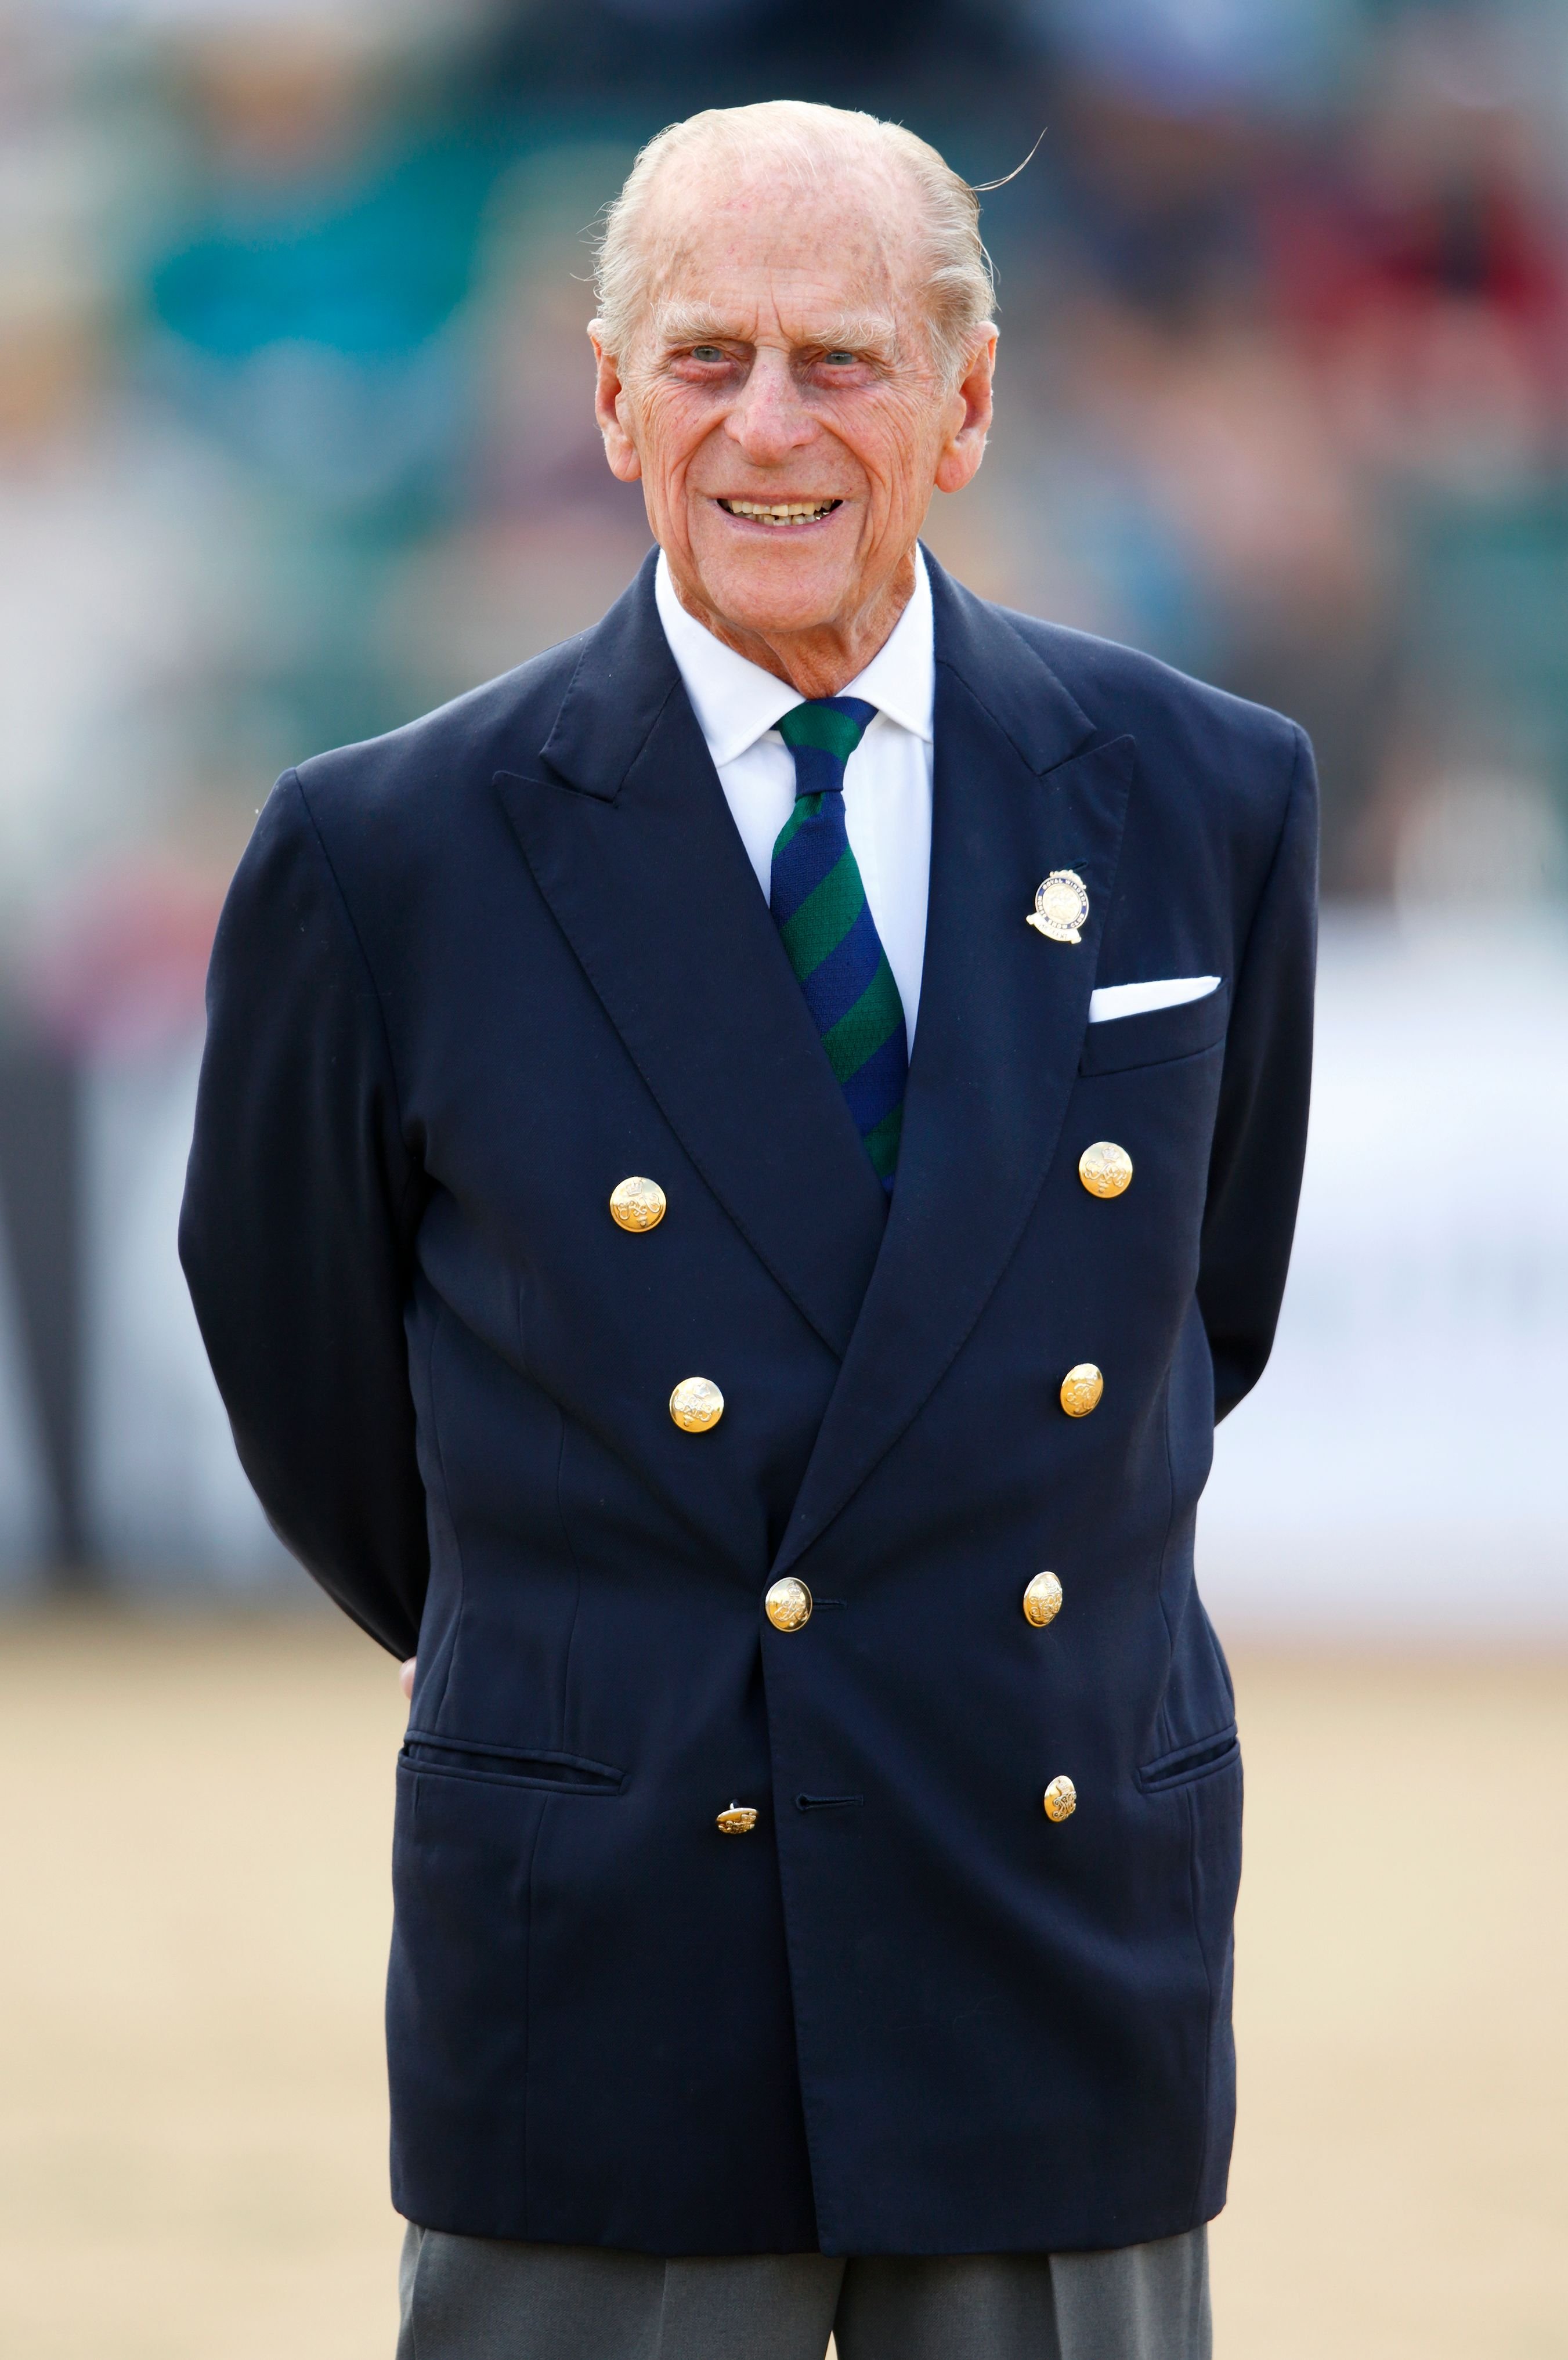 Prince Philip on May 15, 2014 in Windsor, England. | Photo: Getty Images